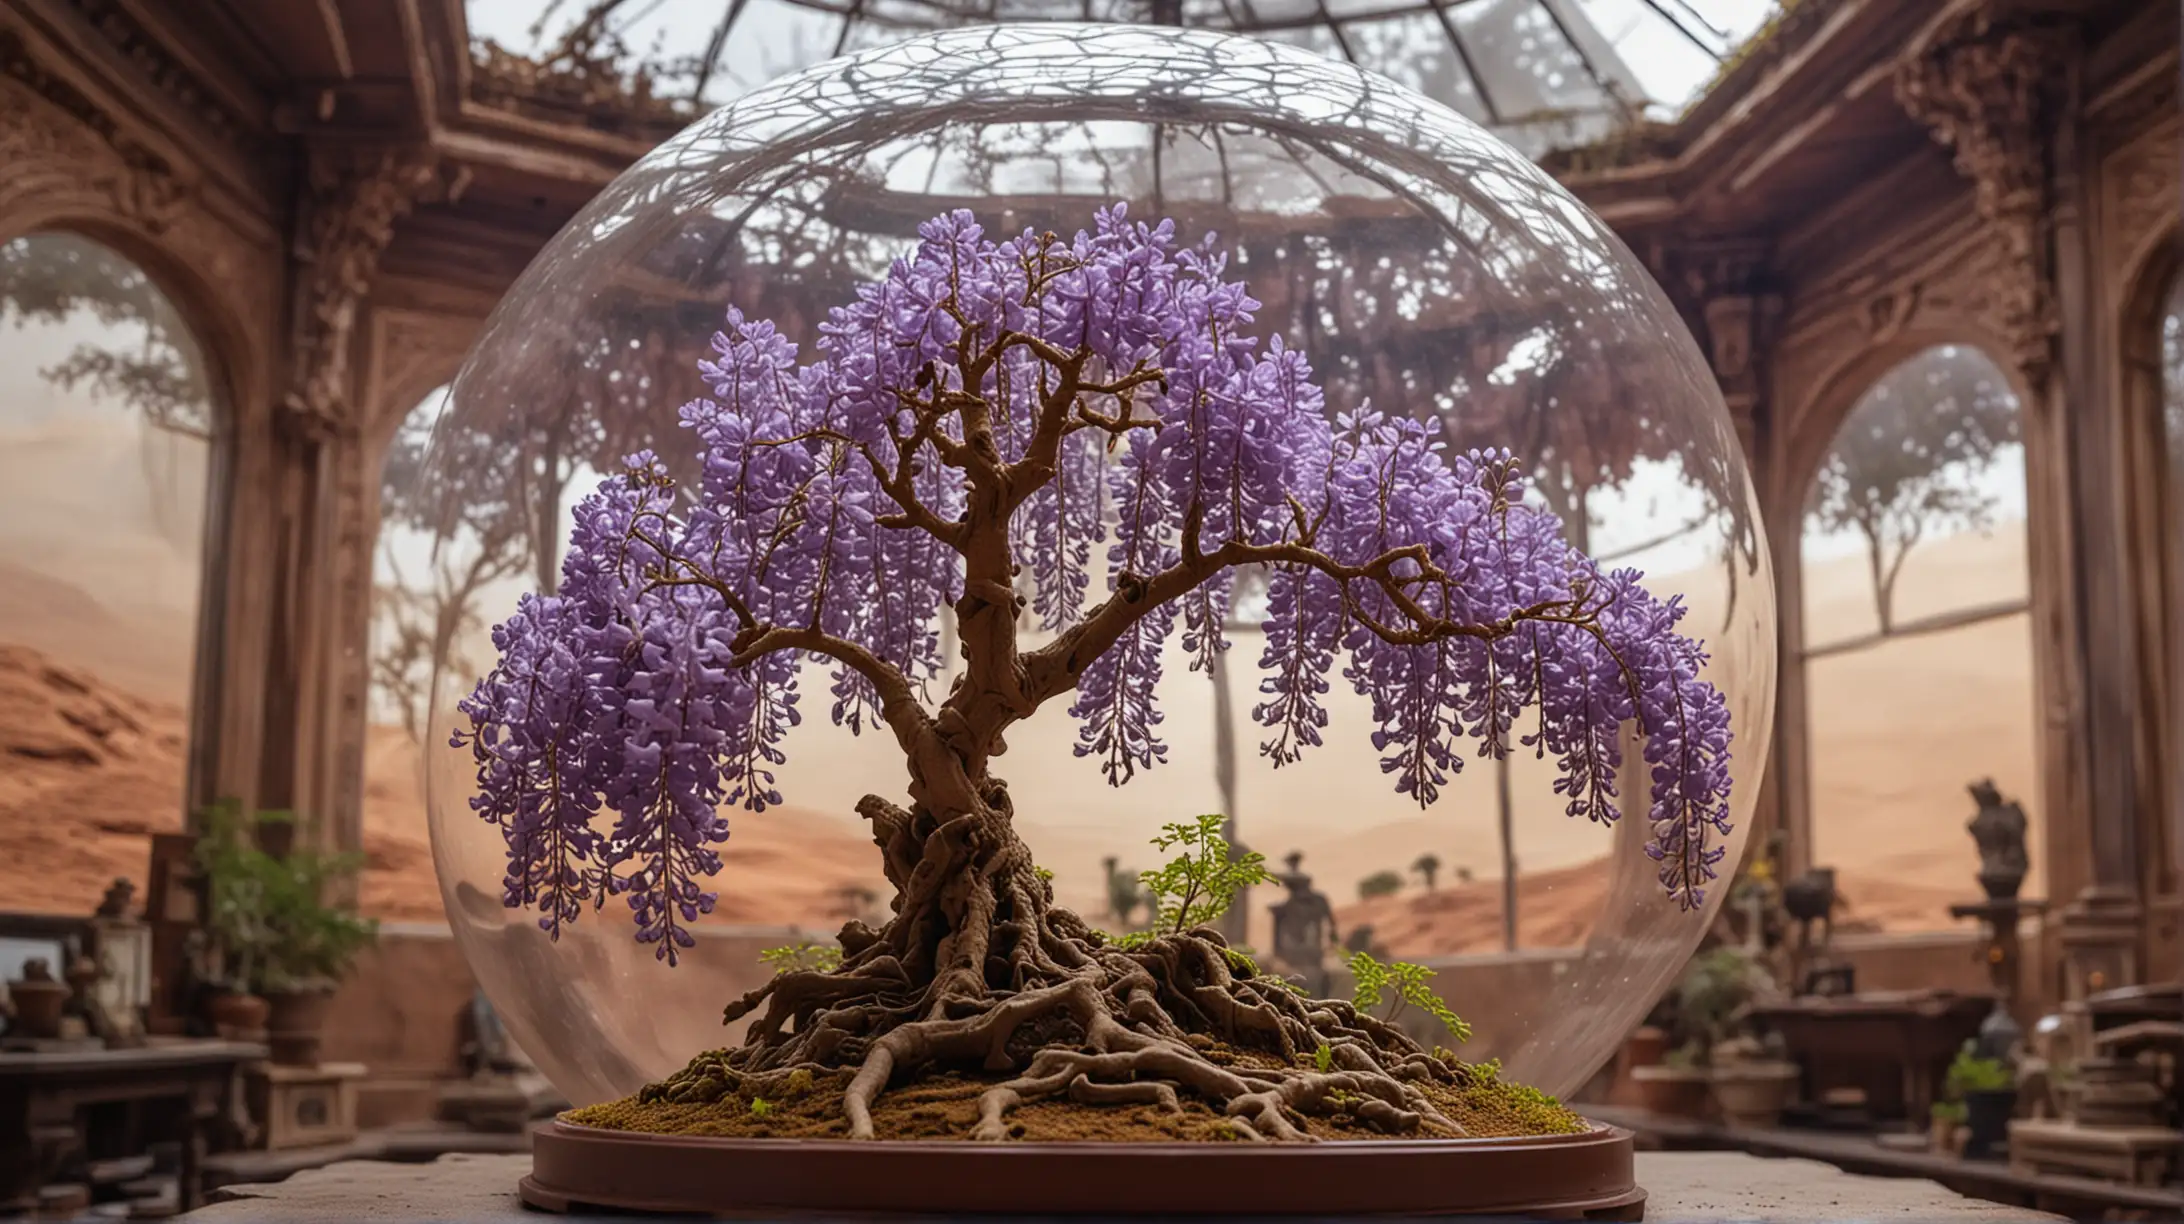 Wisteria Bonsai Tree in Glass Dome on Mars Surface